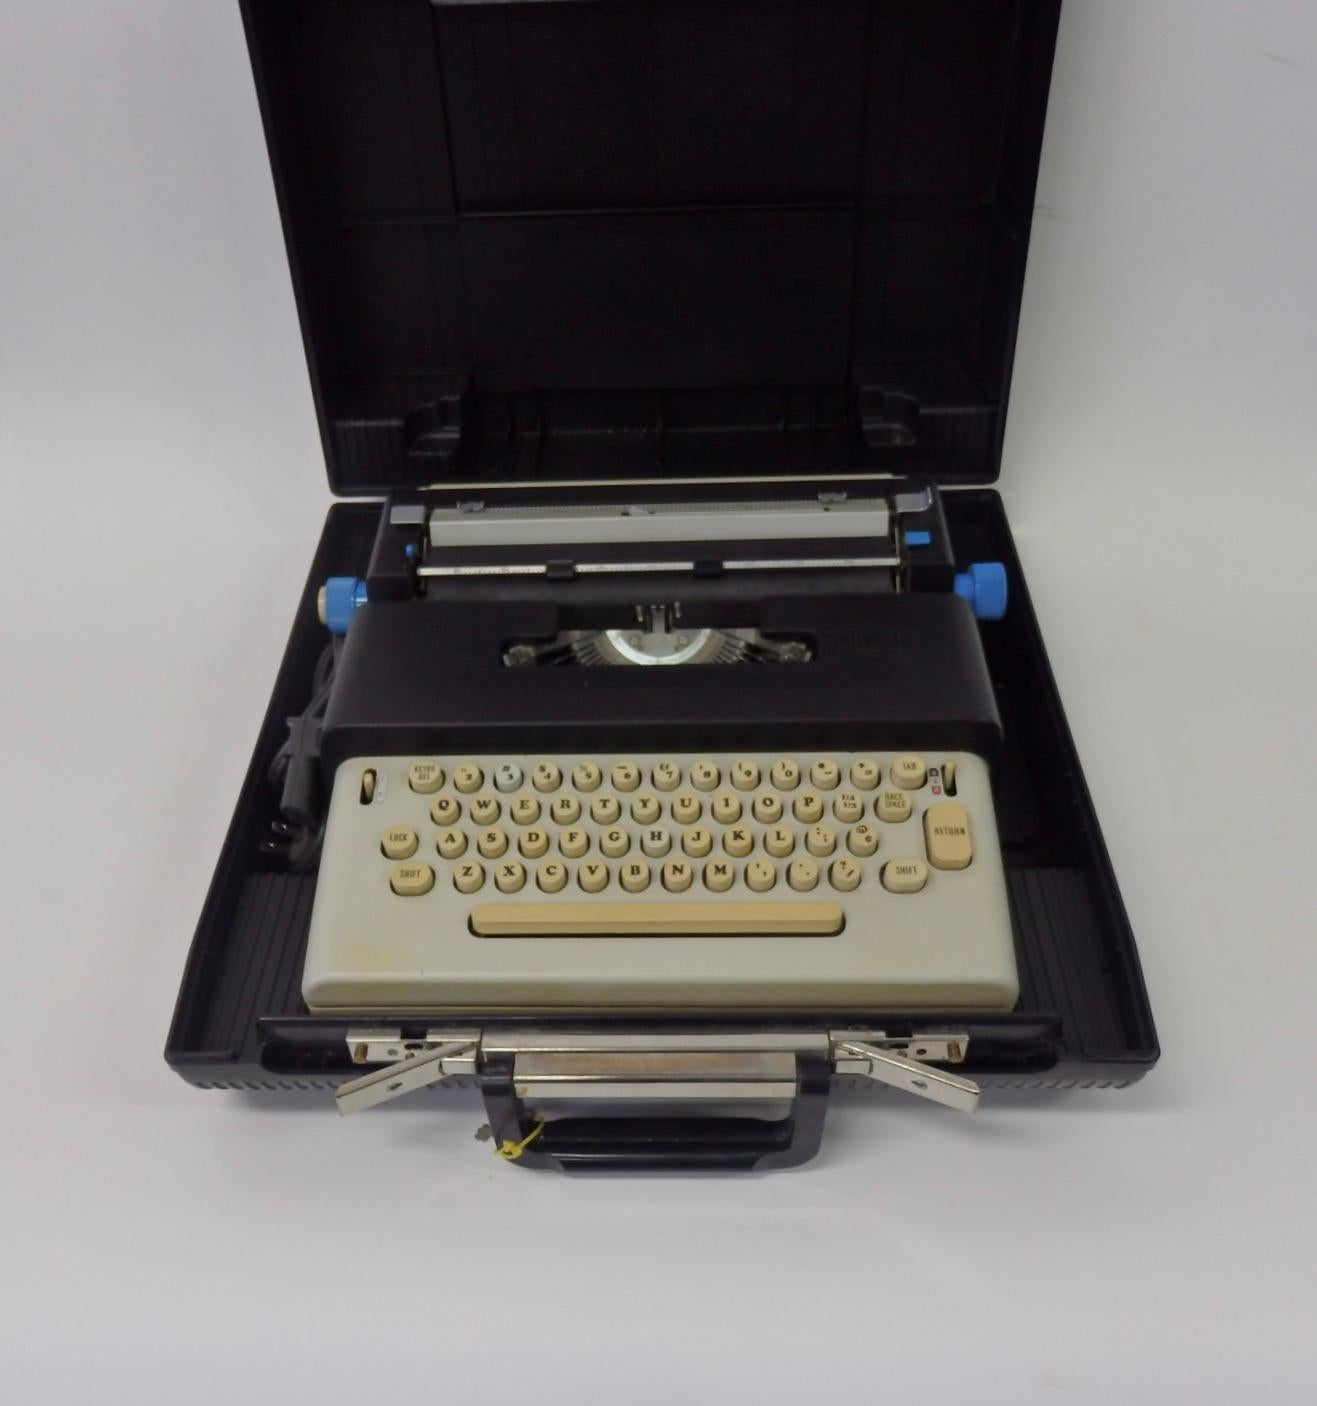 Olivettis first portable electric typewriter. Designed by Ettore Sottssas. Very complete example with carrying case and cord. In excellent condition.